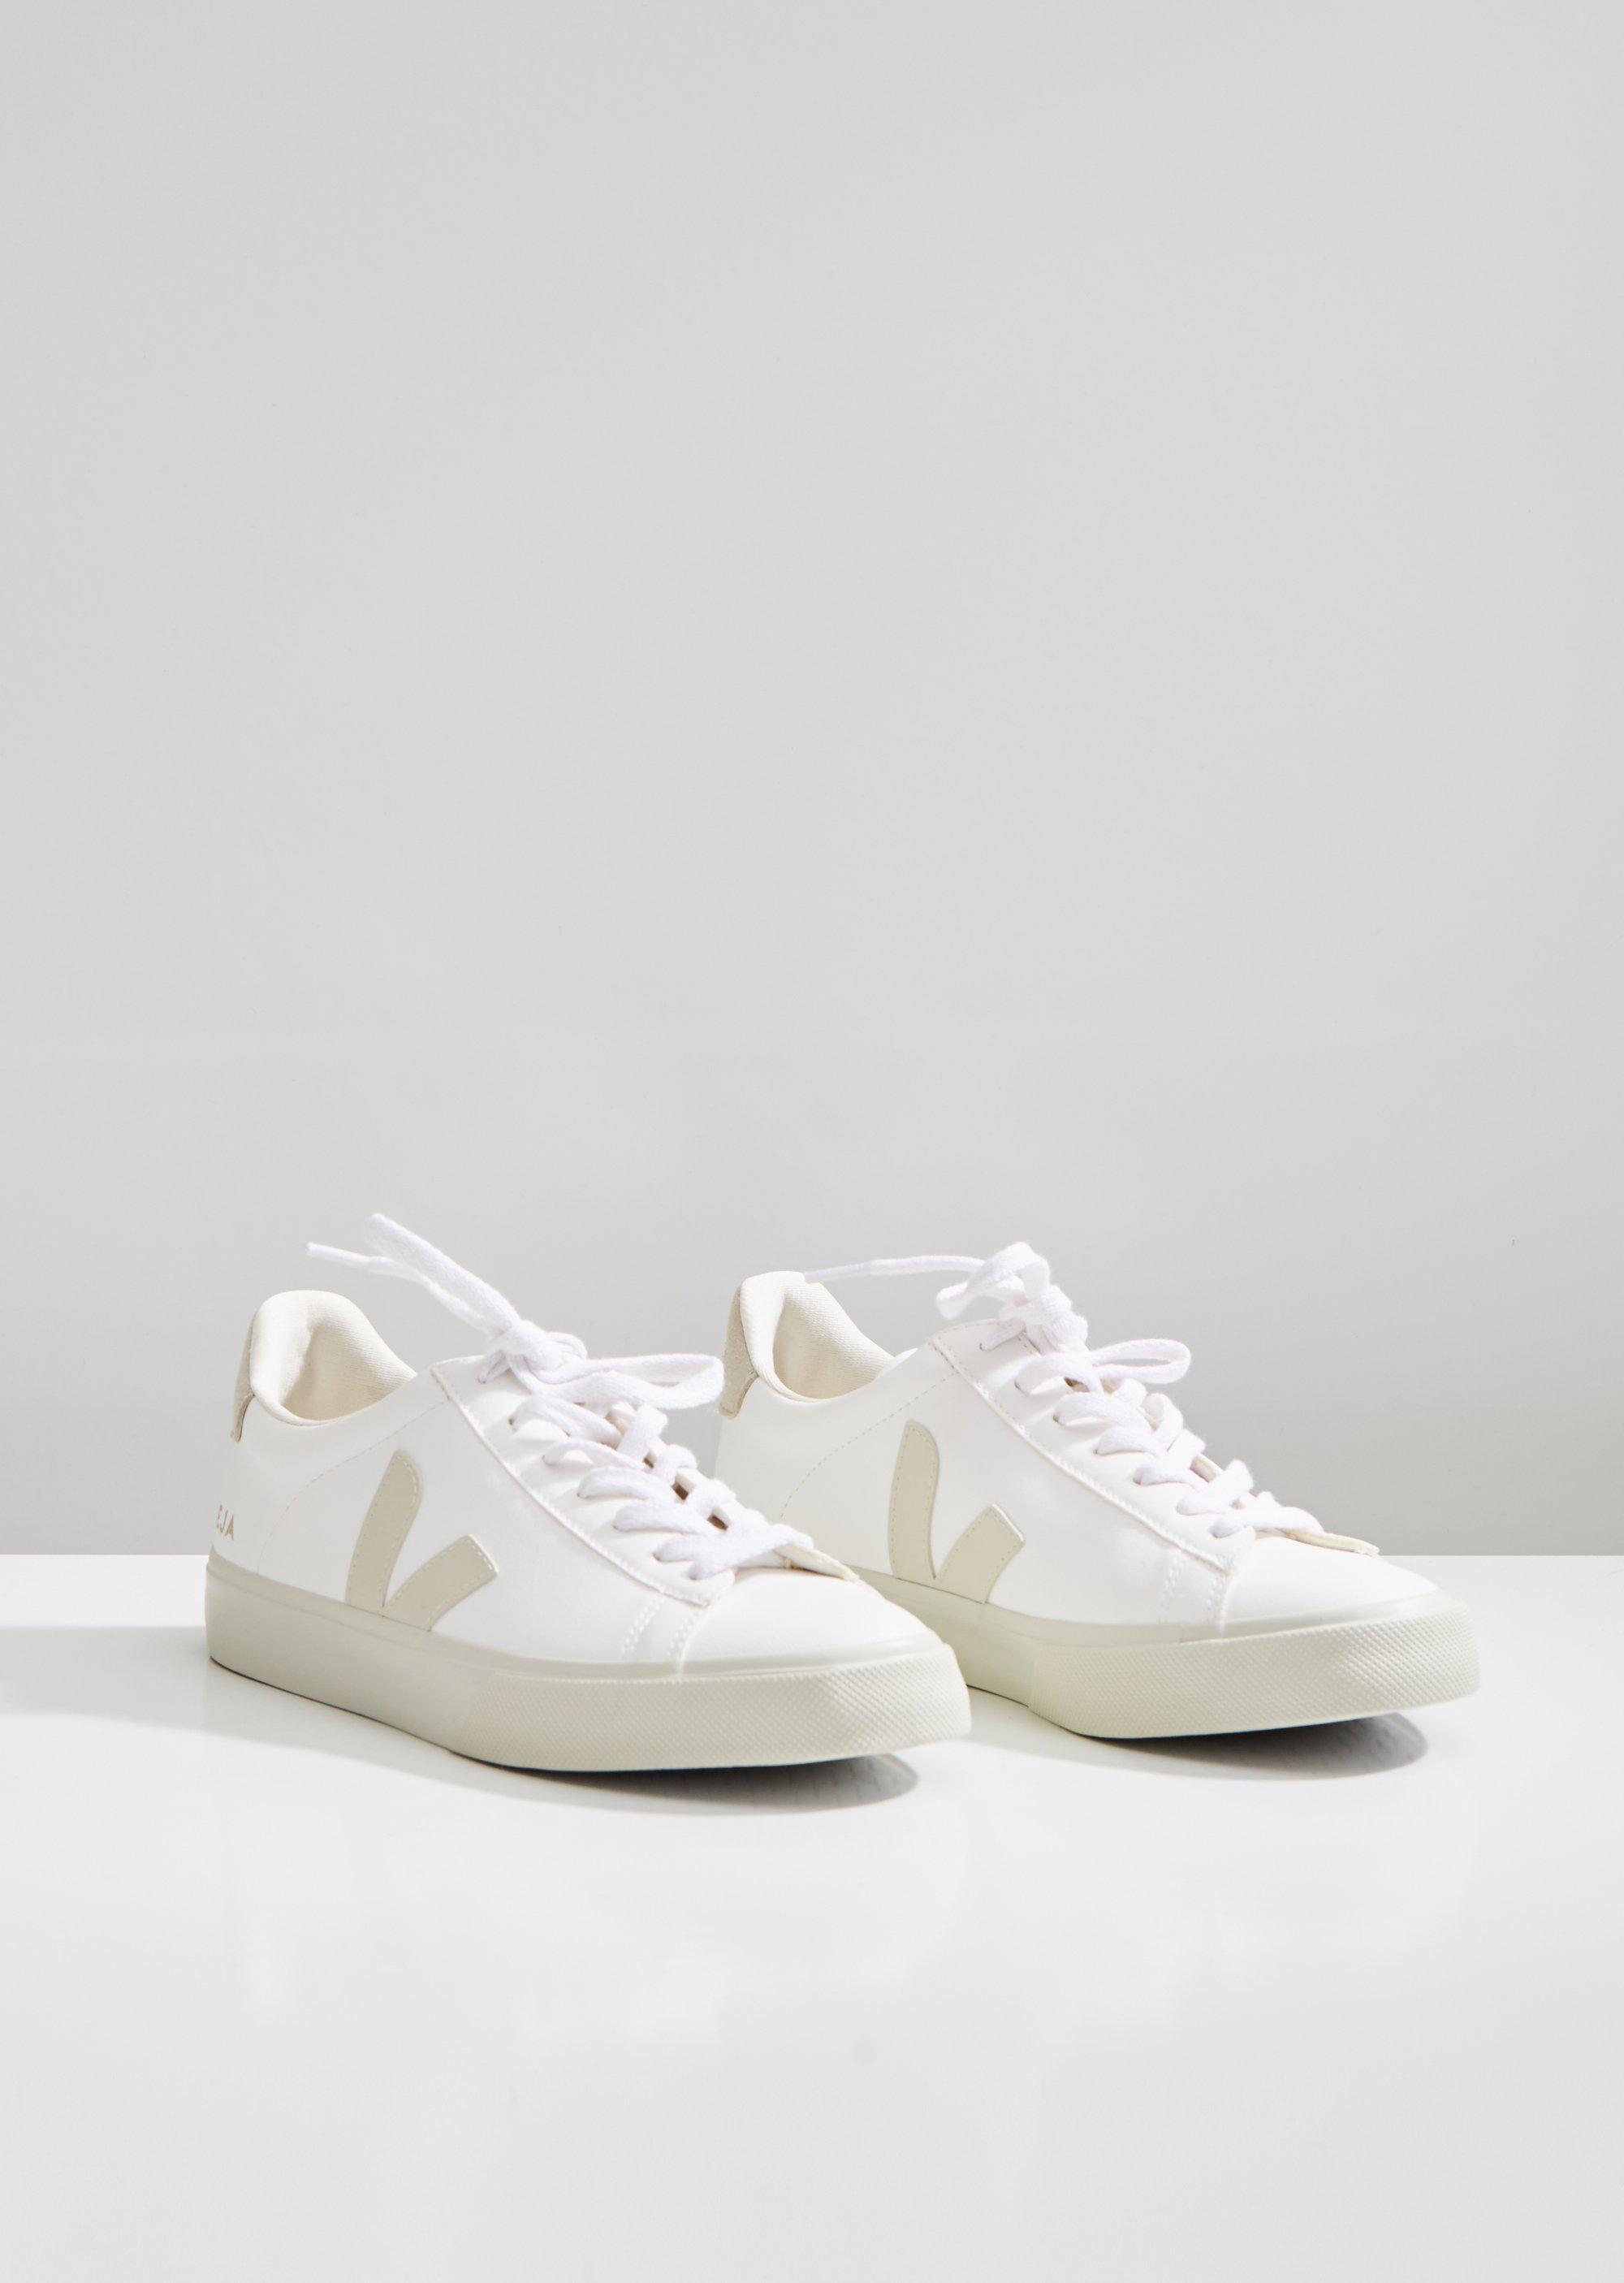 Veja Leather Campo Sneakers in White | Lyst